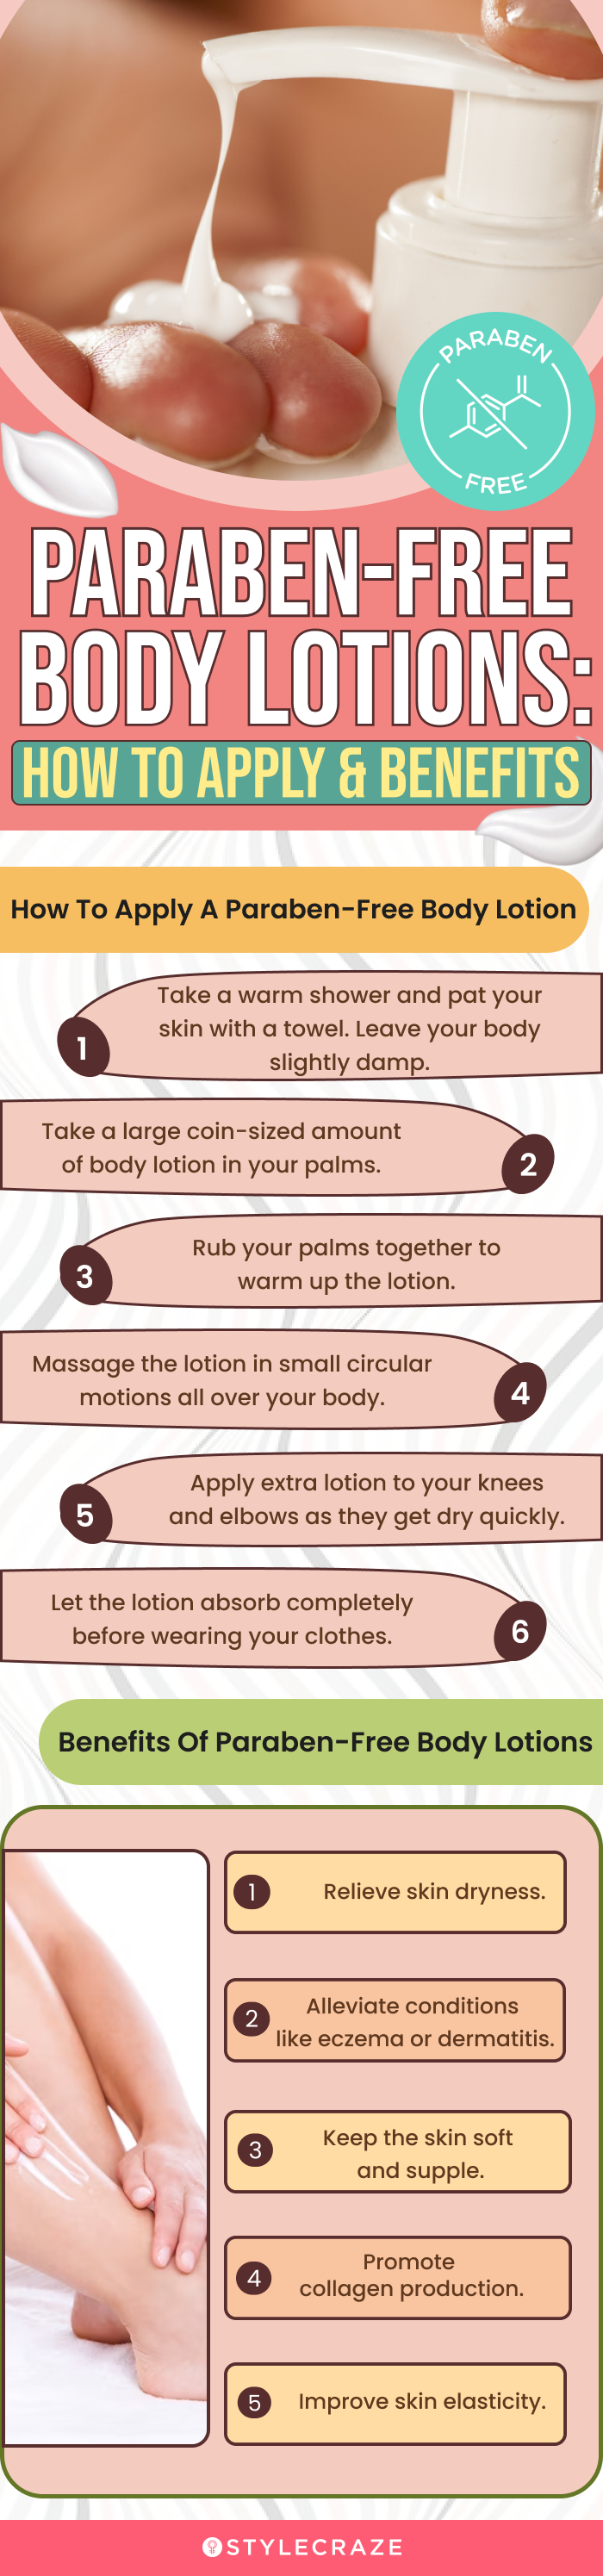 Paraben-Free Body Lotion: How To Apply & Benefits (infographic)